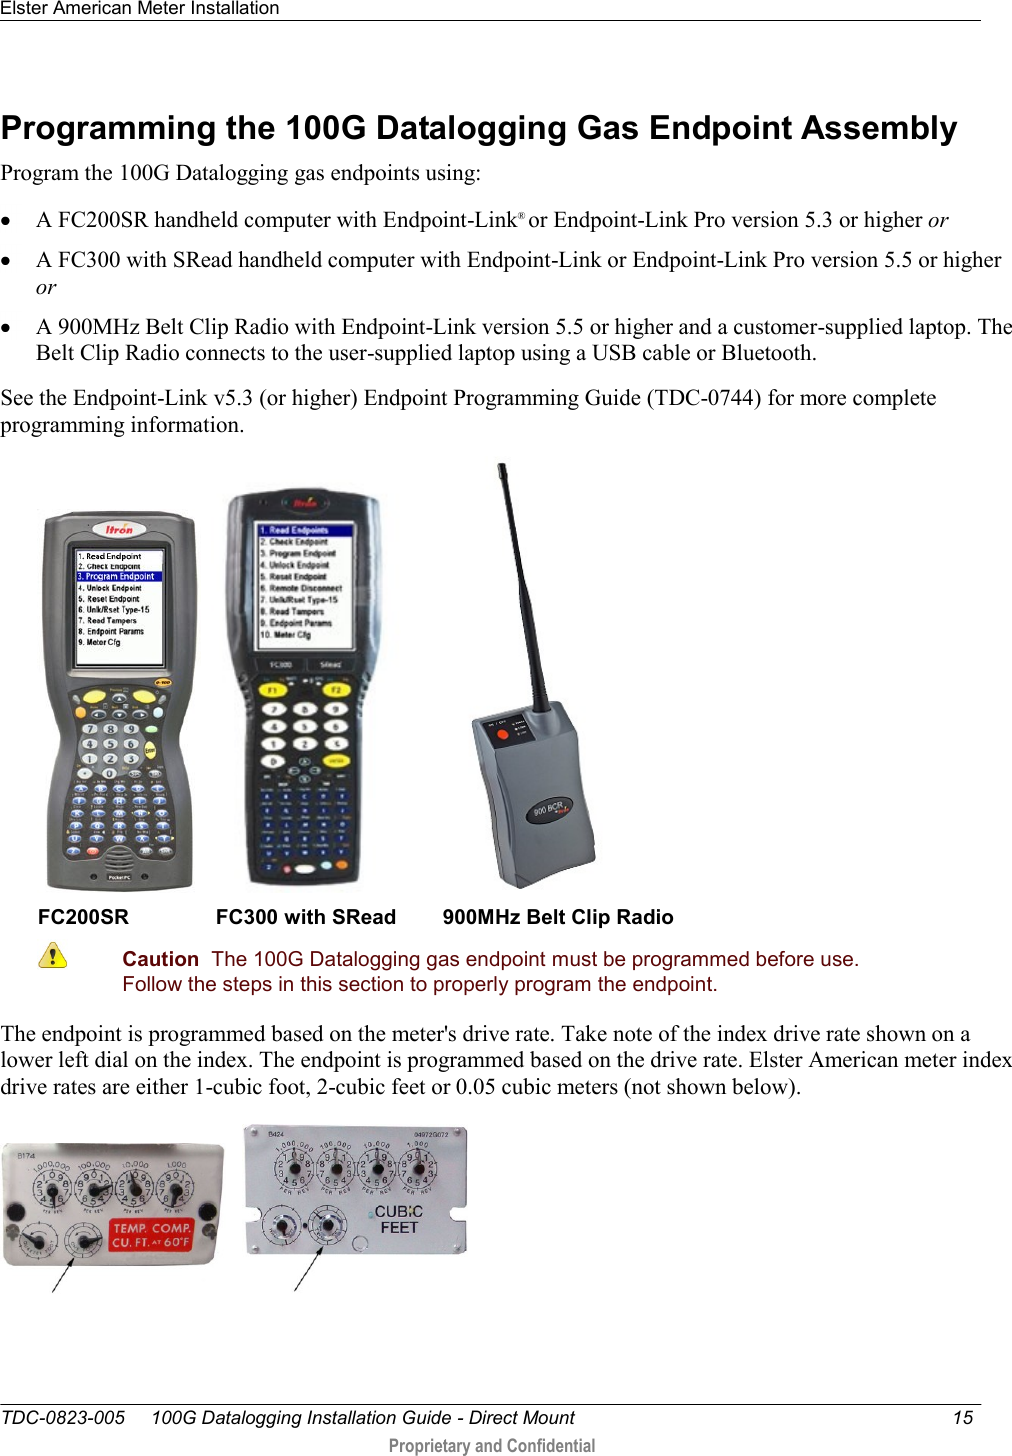 Elster American Meter Installation   TDC-0823-005     100G Datalogging Installation Guide - Direct Mount  15   Proprietary and Confidential     Programming the 100G Datalogging Gas Endpoint Assembly Program the 100G Datalogging gas endpoints using:  A FC200SR handheld computer with Endpoint-Link® or Endpoint-Link Pro version 5.3 or higher or  A FC300 with SRead handheld computer with Endpoint-Link or Endpoint-Link Pro version 5.5 or higher or  A 900MHz Belt Clip Radio with Endpoint-Link version 5.5 or higher and a customer-supplied laptop. The Belt Clip Radio connects to the user-supplied laptop using a USB cable or Bluetooth. See the Endpoint-Link v5.3 (or higher) Endpoint Programming Guide (TDC-0744) for more complete programming information.       FC200SR               FC300 with SRead        900MHz Belt Clip Radio  Caution  The 100G Datalogging gas endpoint must be programmed before use. Follow the steps in this section to properly program the endpoint.  The endpoint is programmed based on the meter&apos;s drive rate. Take note of the index drive rate shown on a lower left dial on the index. The endpoint is programmed based on the drive rate. Elster American meter index drive rates are either 1-cubic foot, 2-cubic feet or 0.05 cubic meters (not shown below).        